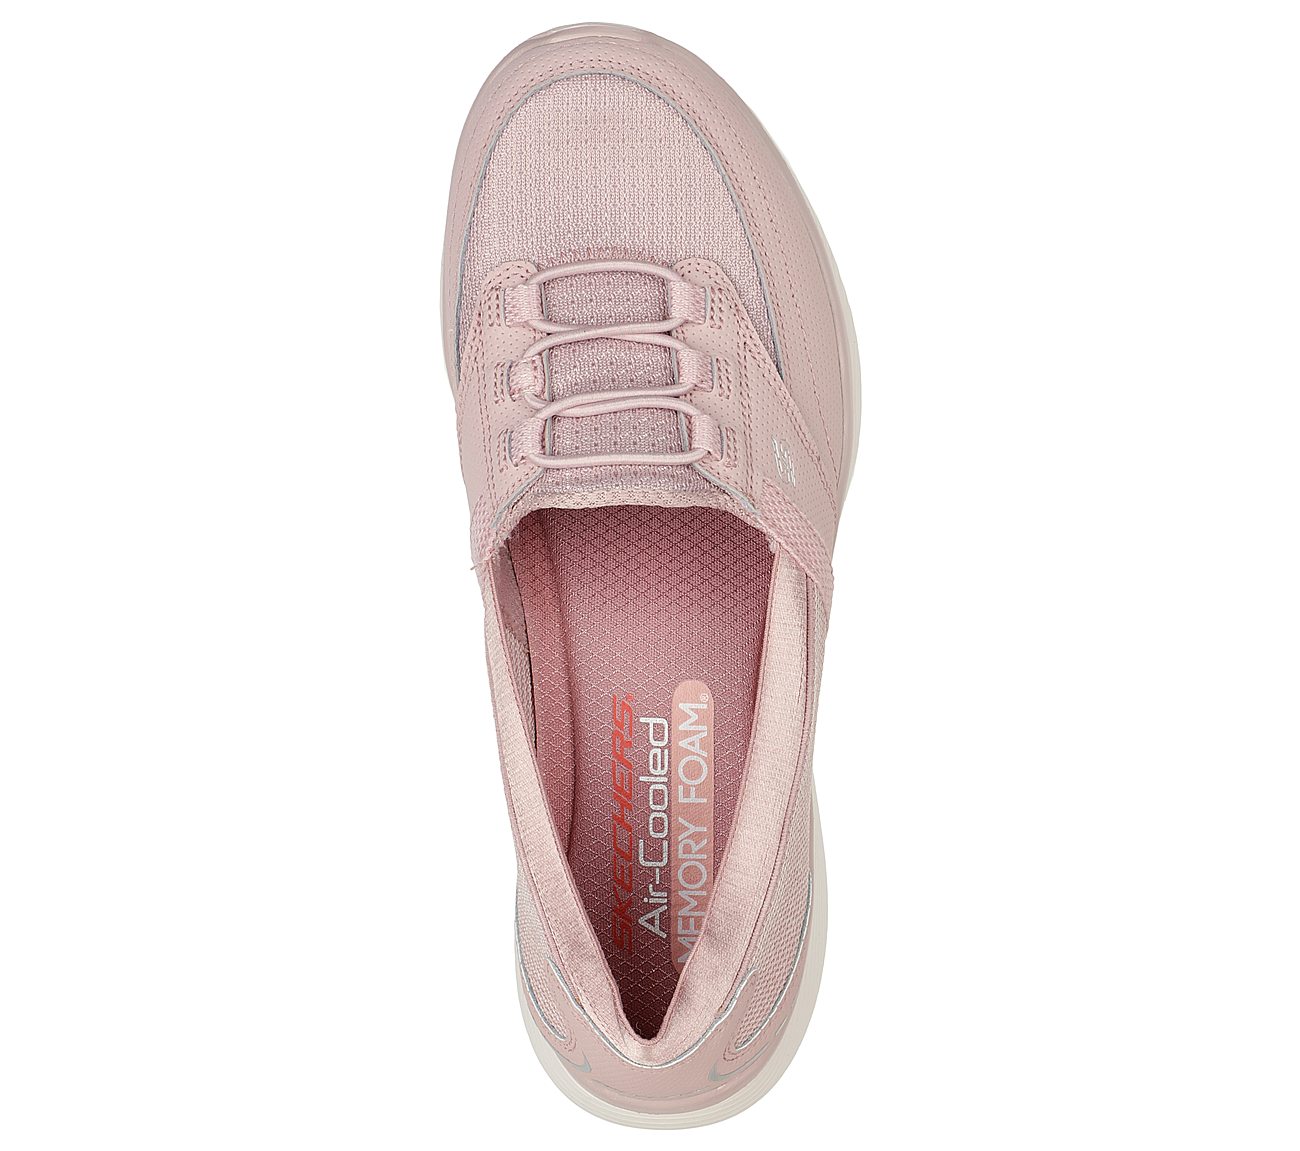 MICROBURST 2.0 - SAVVY POISE, MMAUVE Footwear Top View